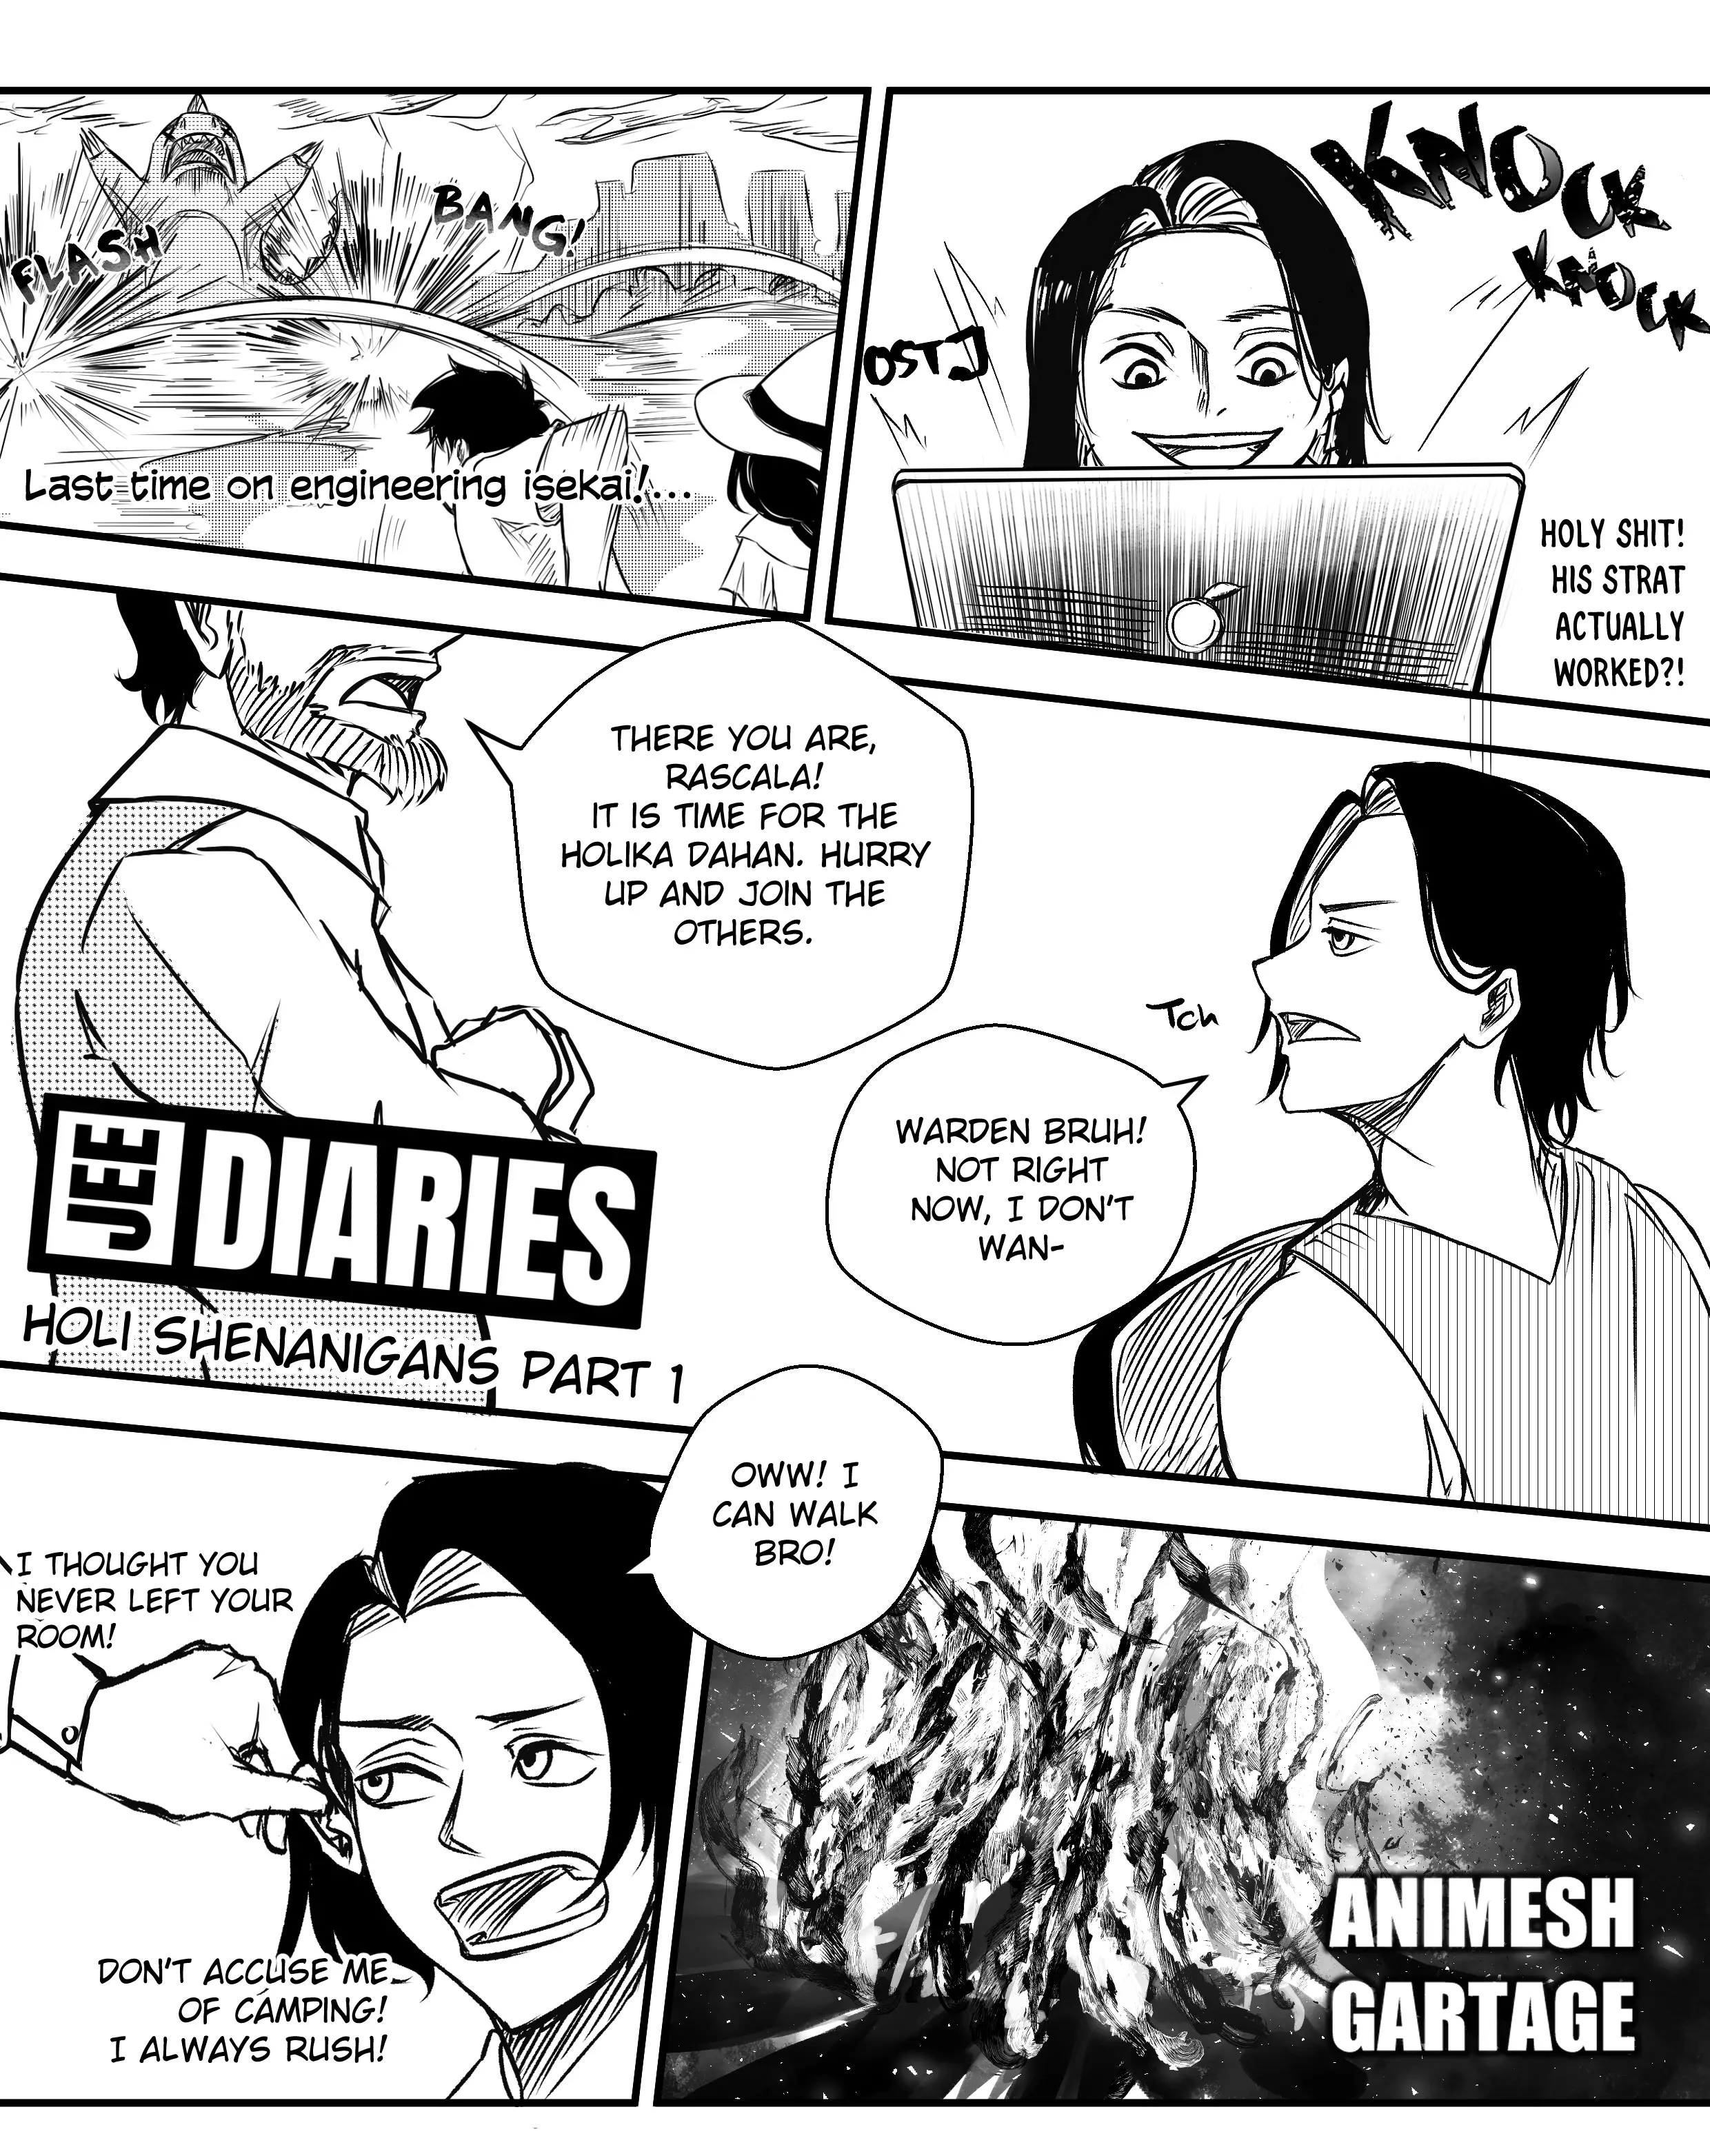 Jee Diaries - 6 page 1-26f8ef40